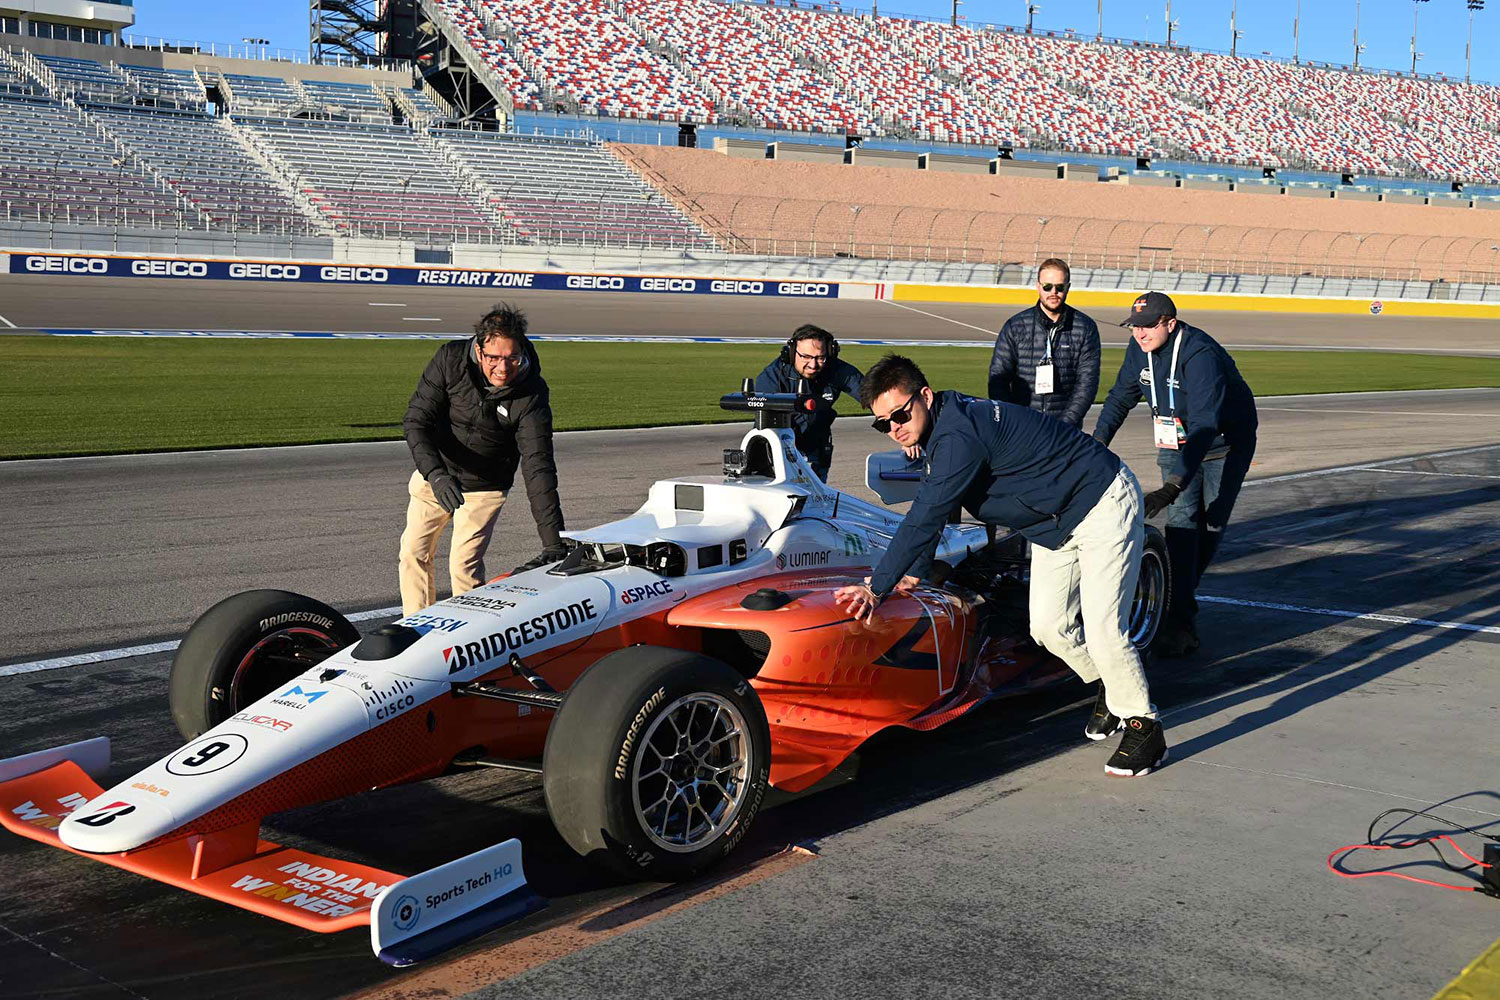 Members of the Cavalier Autonomous Racing team move their Indy car into position for a high-speed, driverless run.